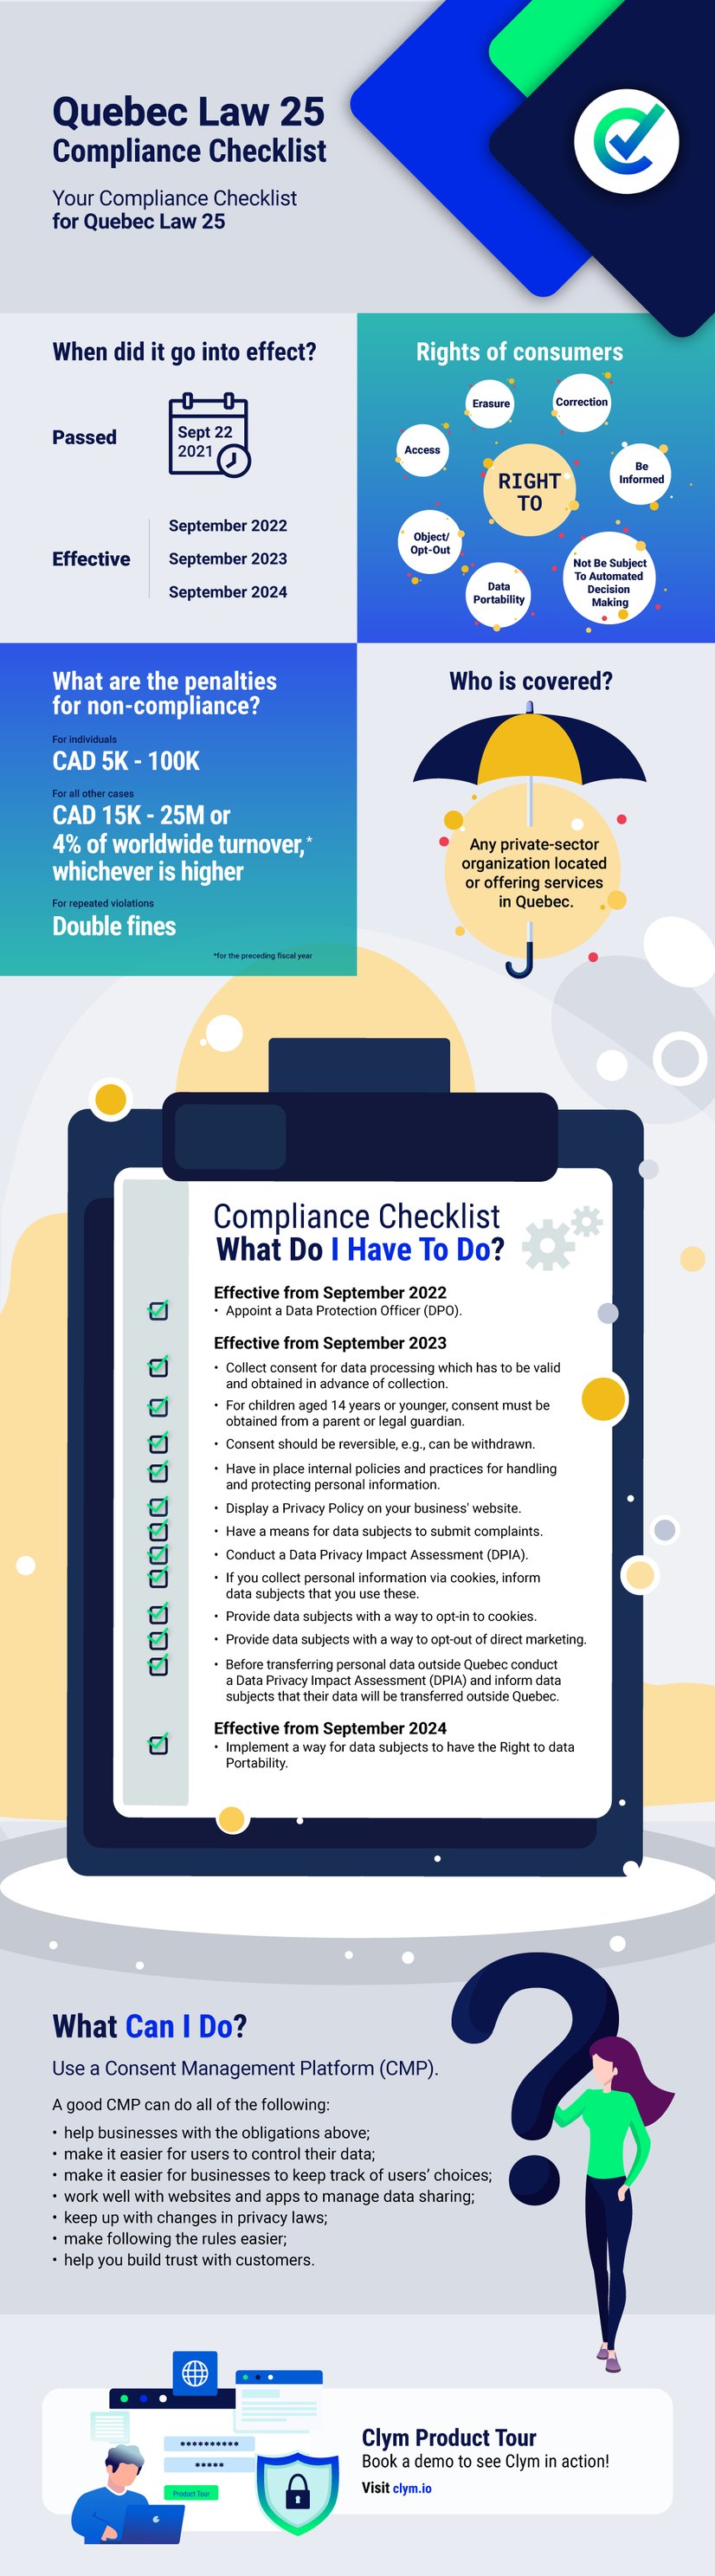 Quebec_Law_25-Compliance-Checklists